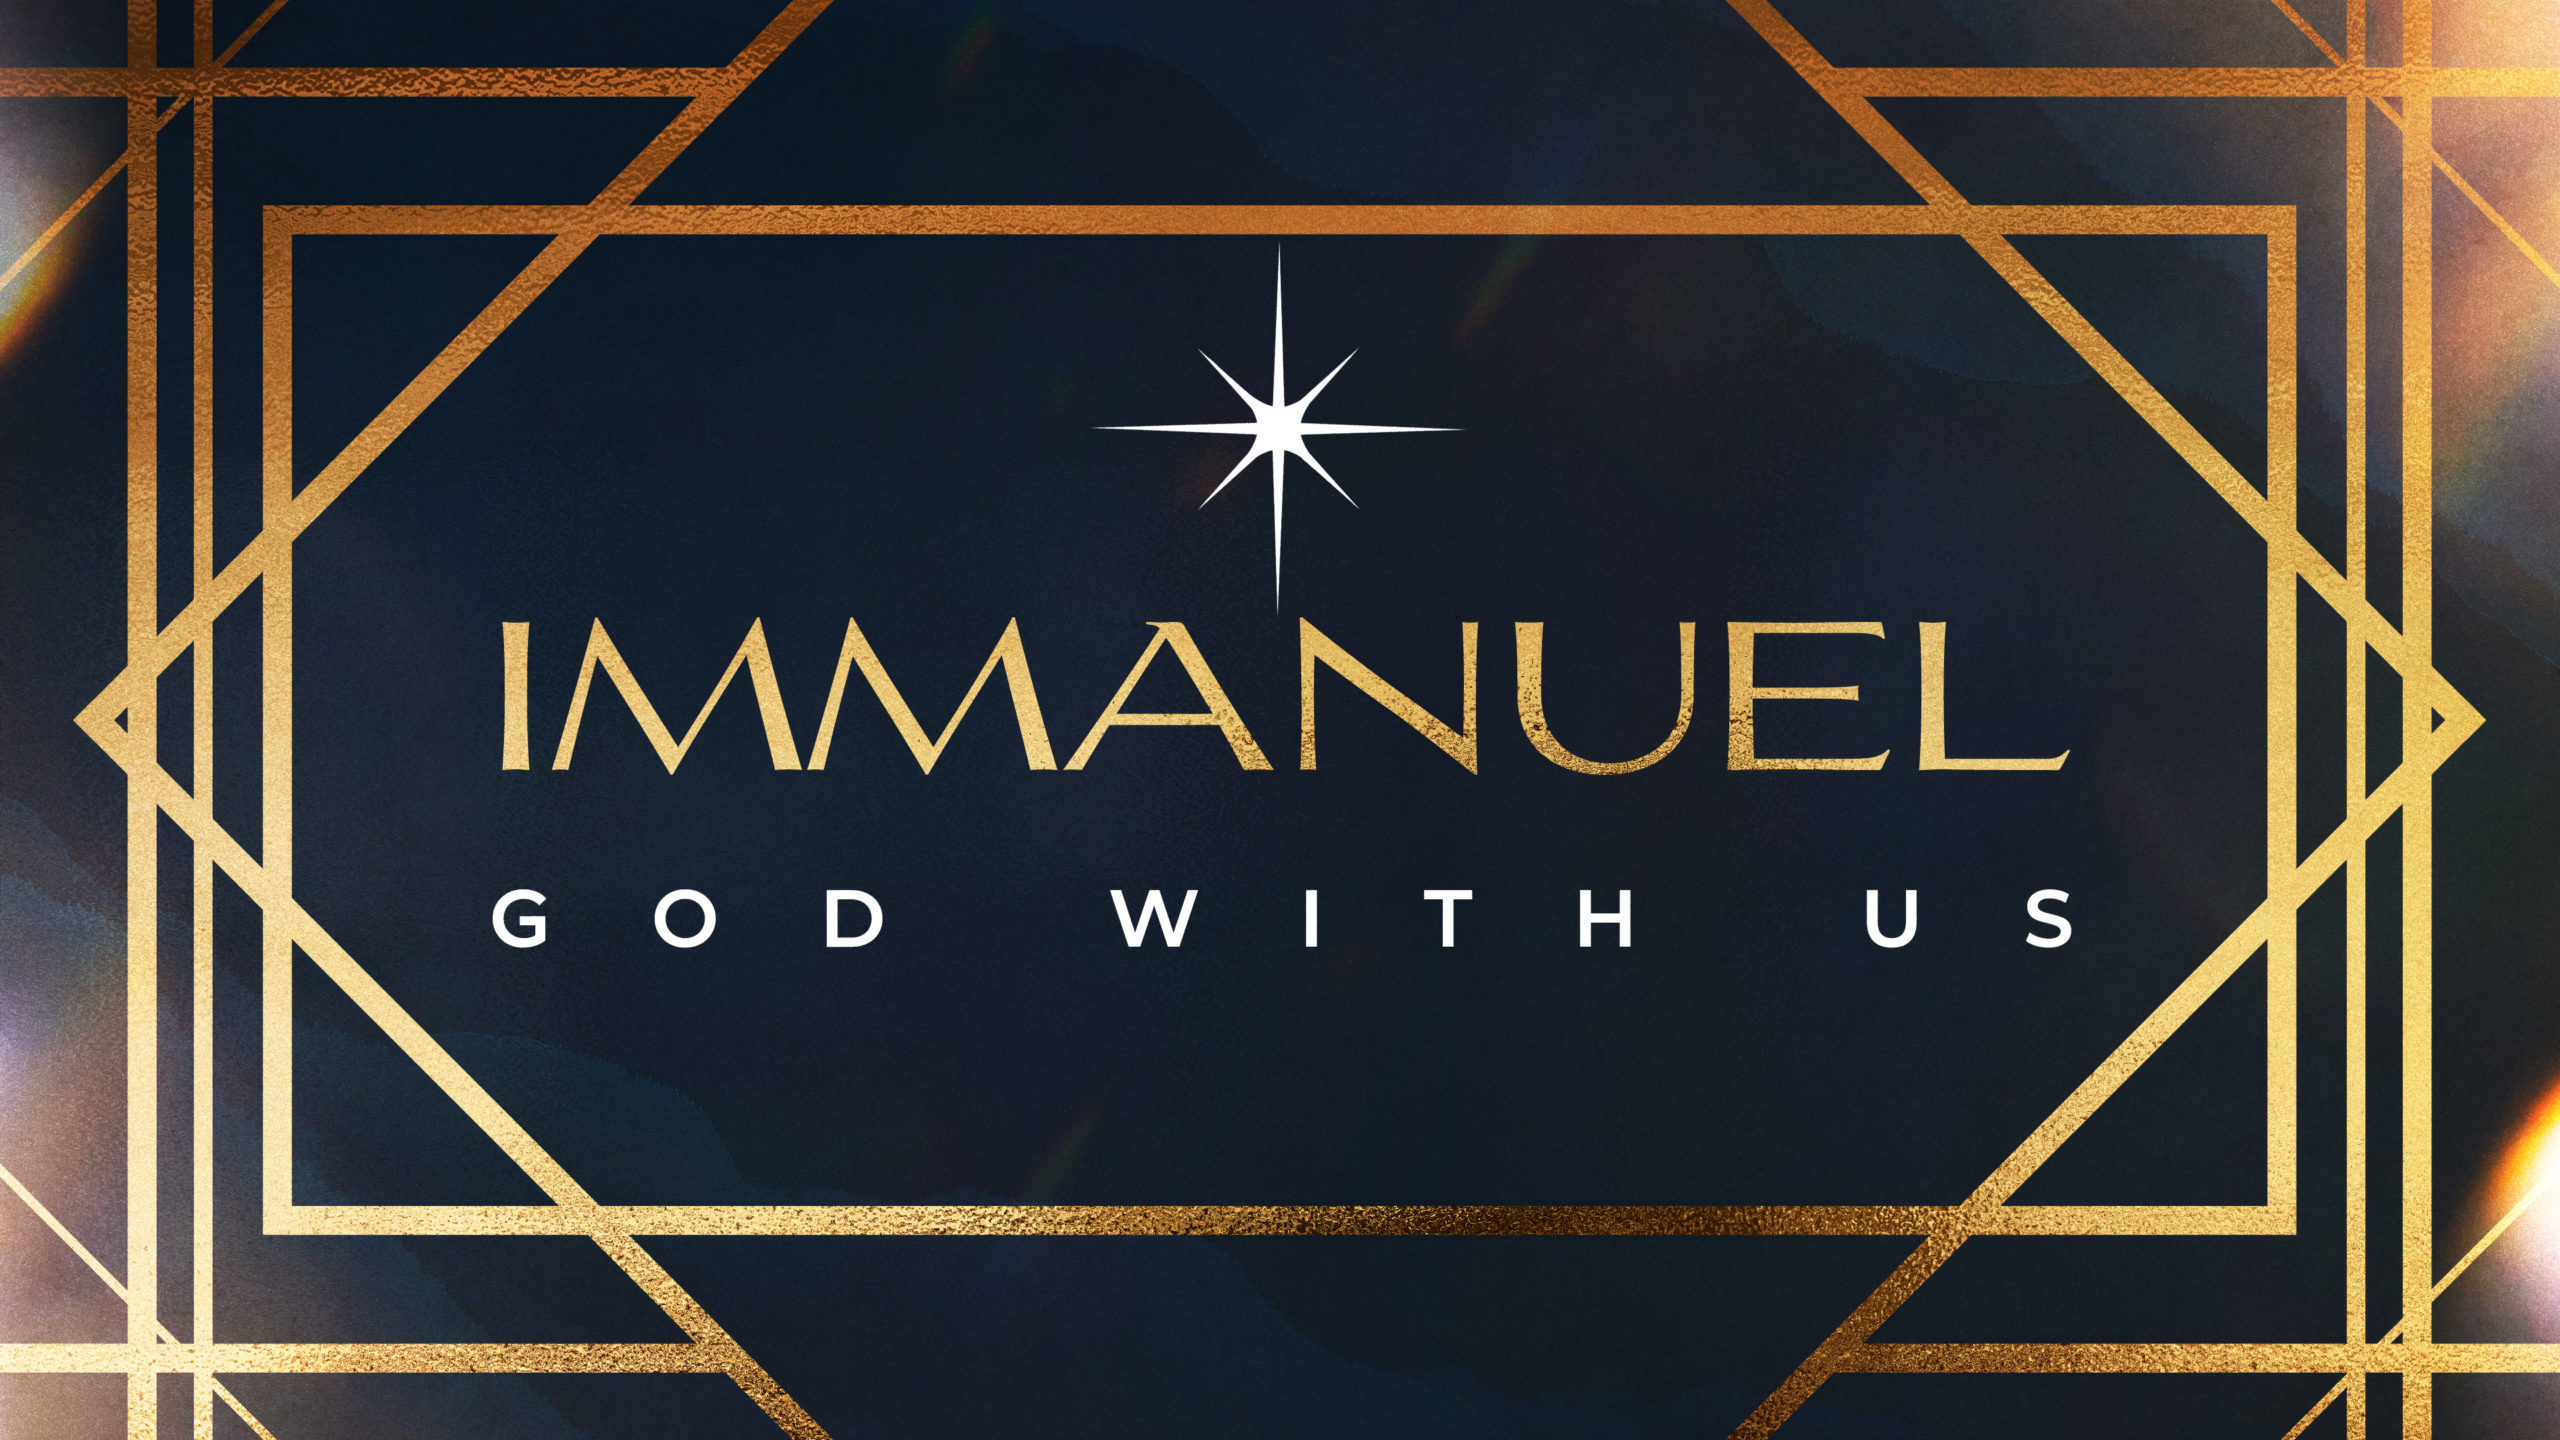 Immanuel God With us